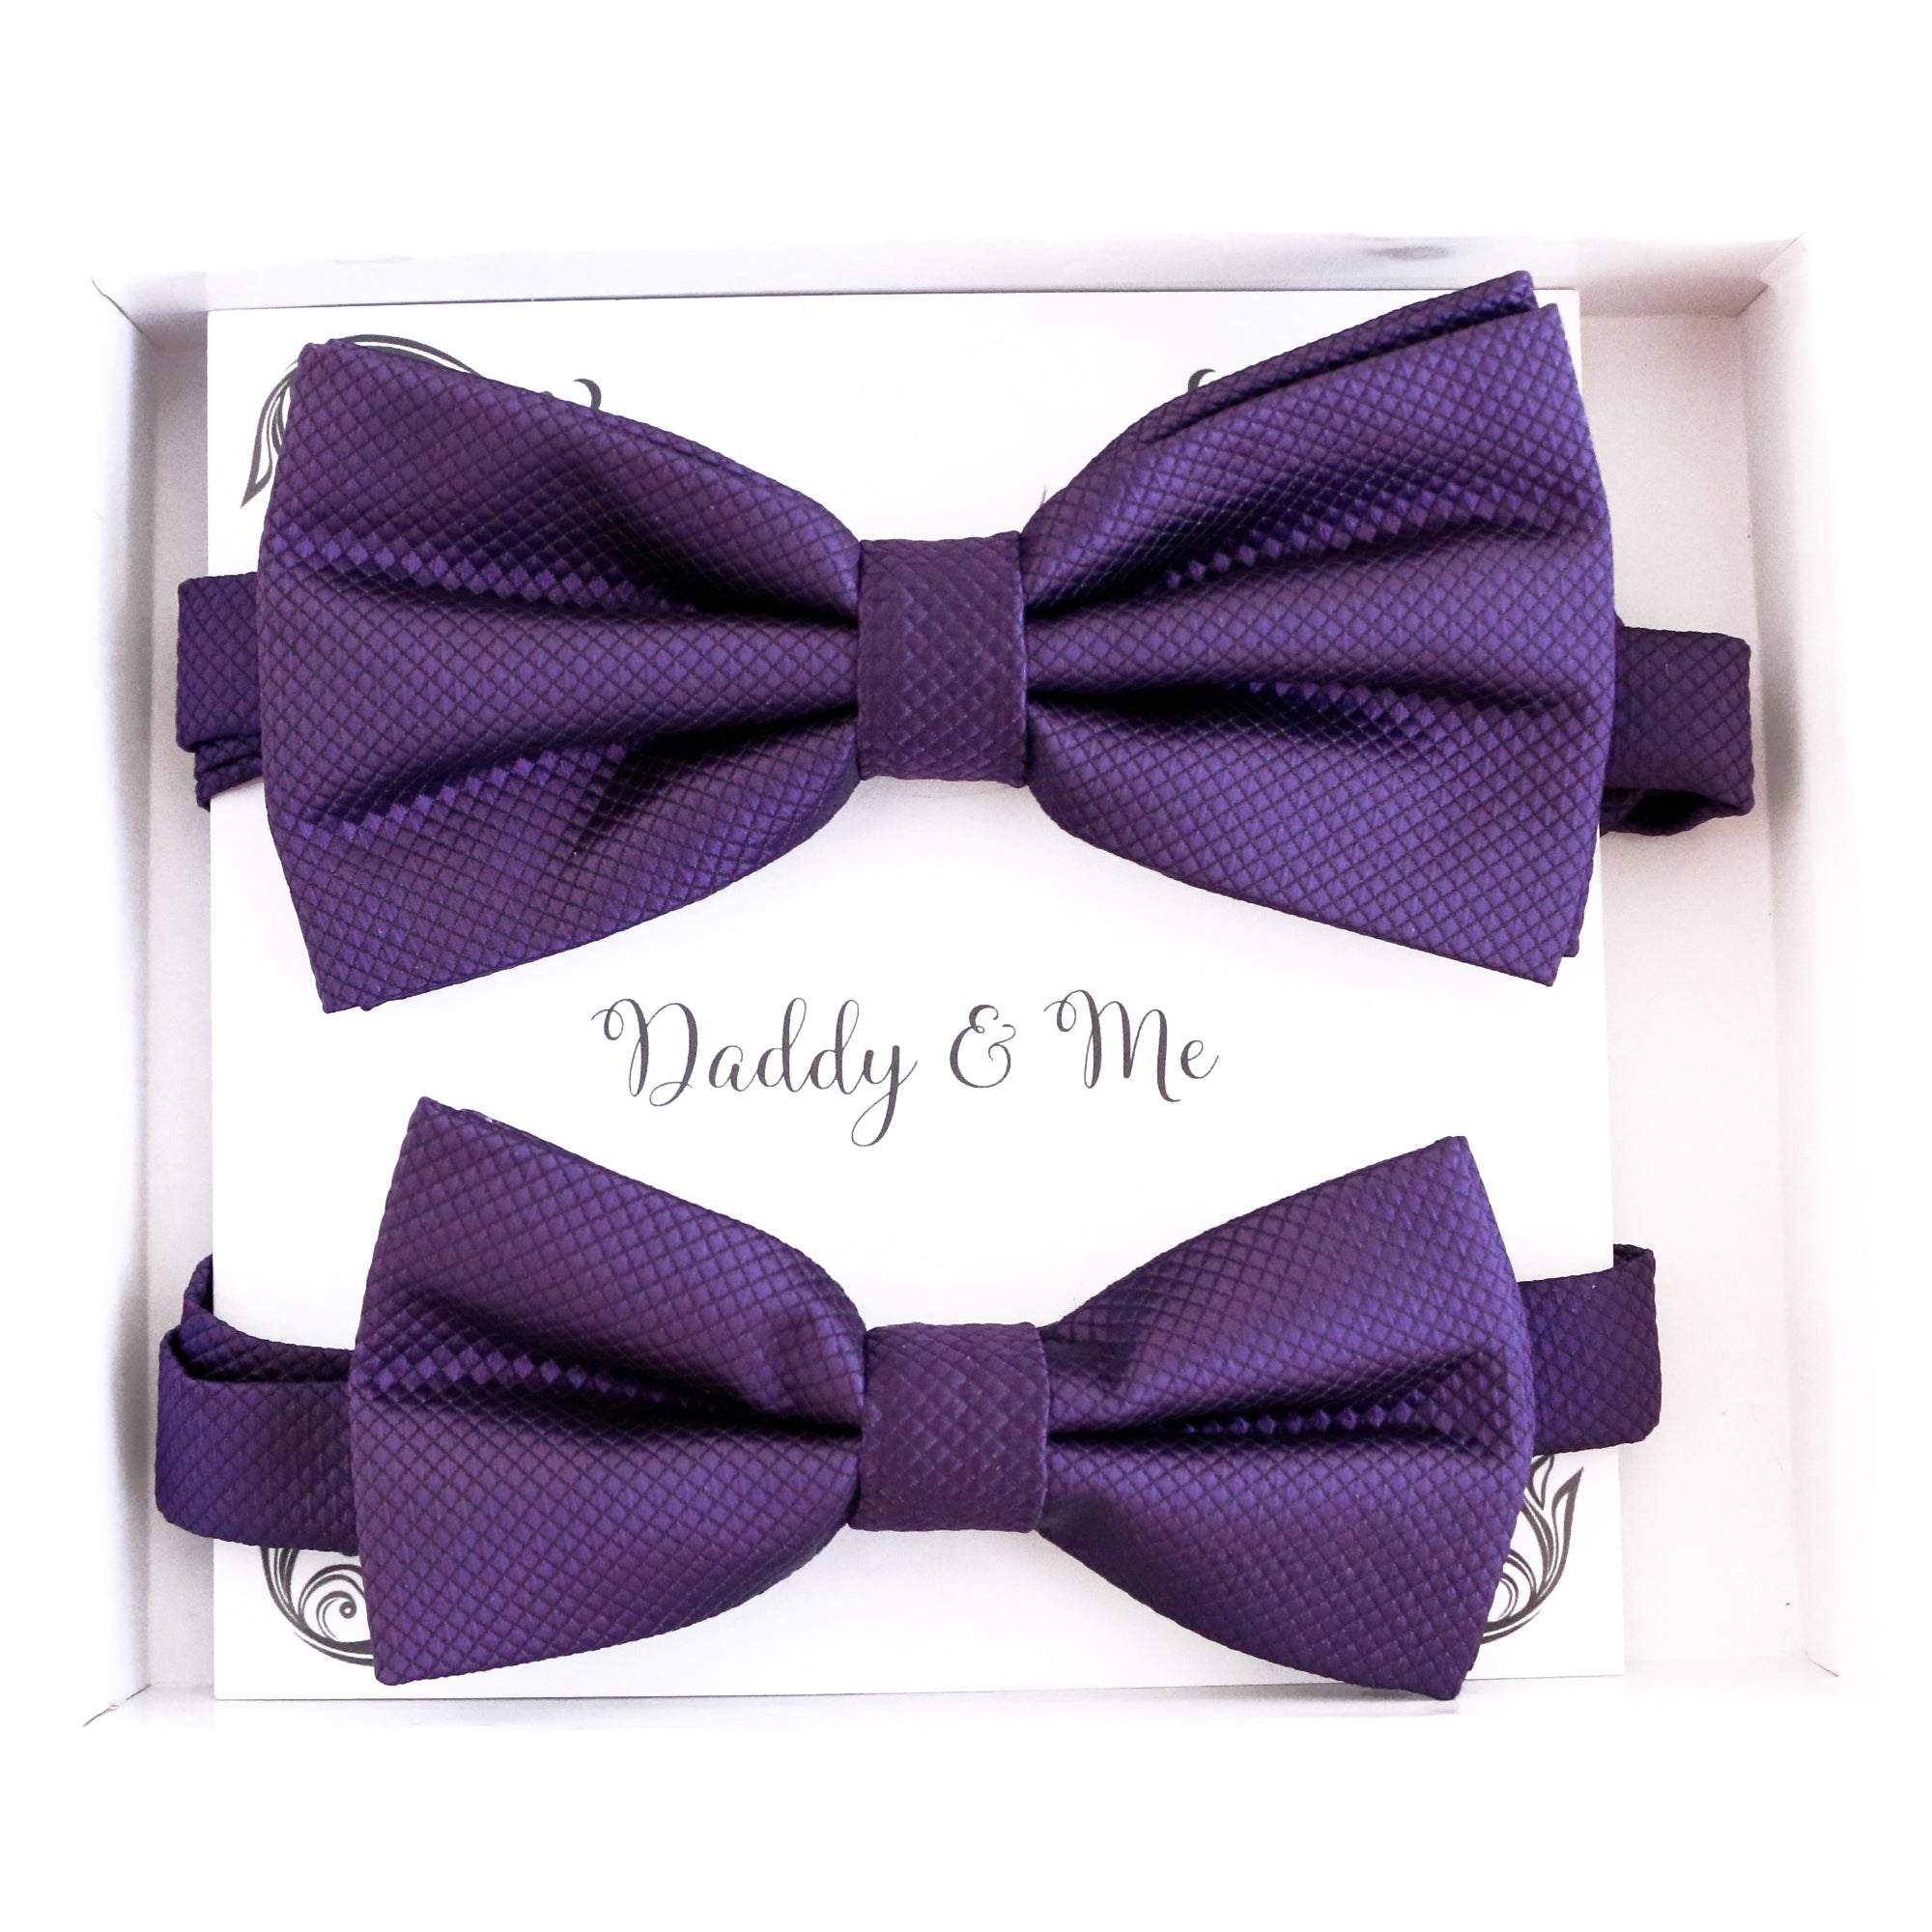 Purple Bow tie set for daddy and son, Daddy and me gift set, Grandpa and me, Father son matching, Toddler bow tie, daddy and me bow tie gift